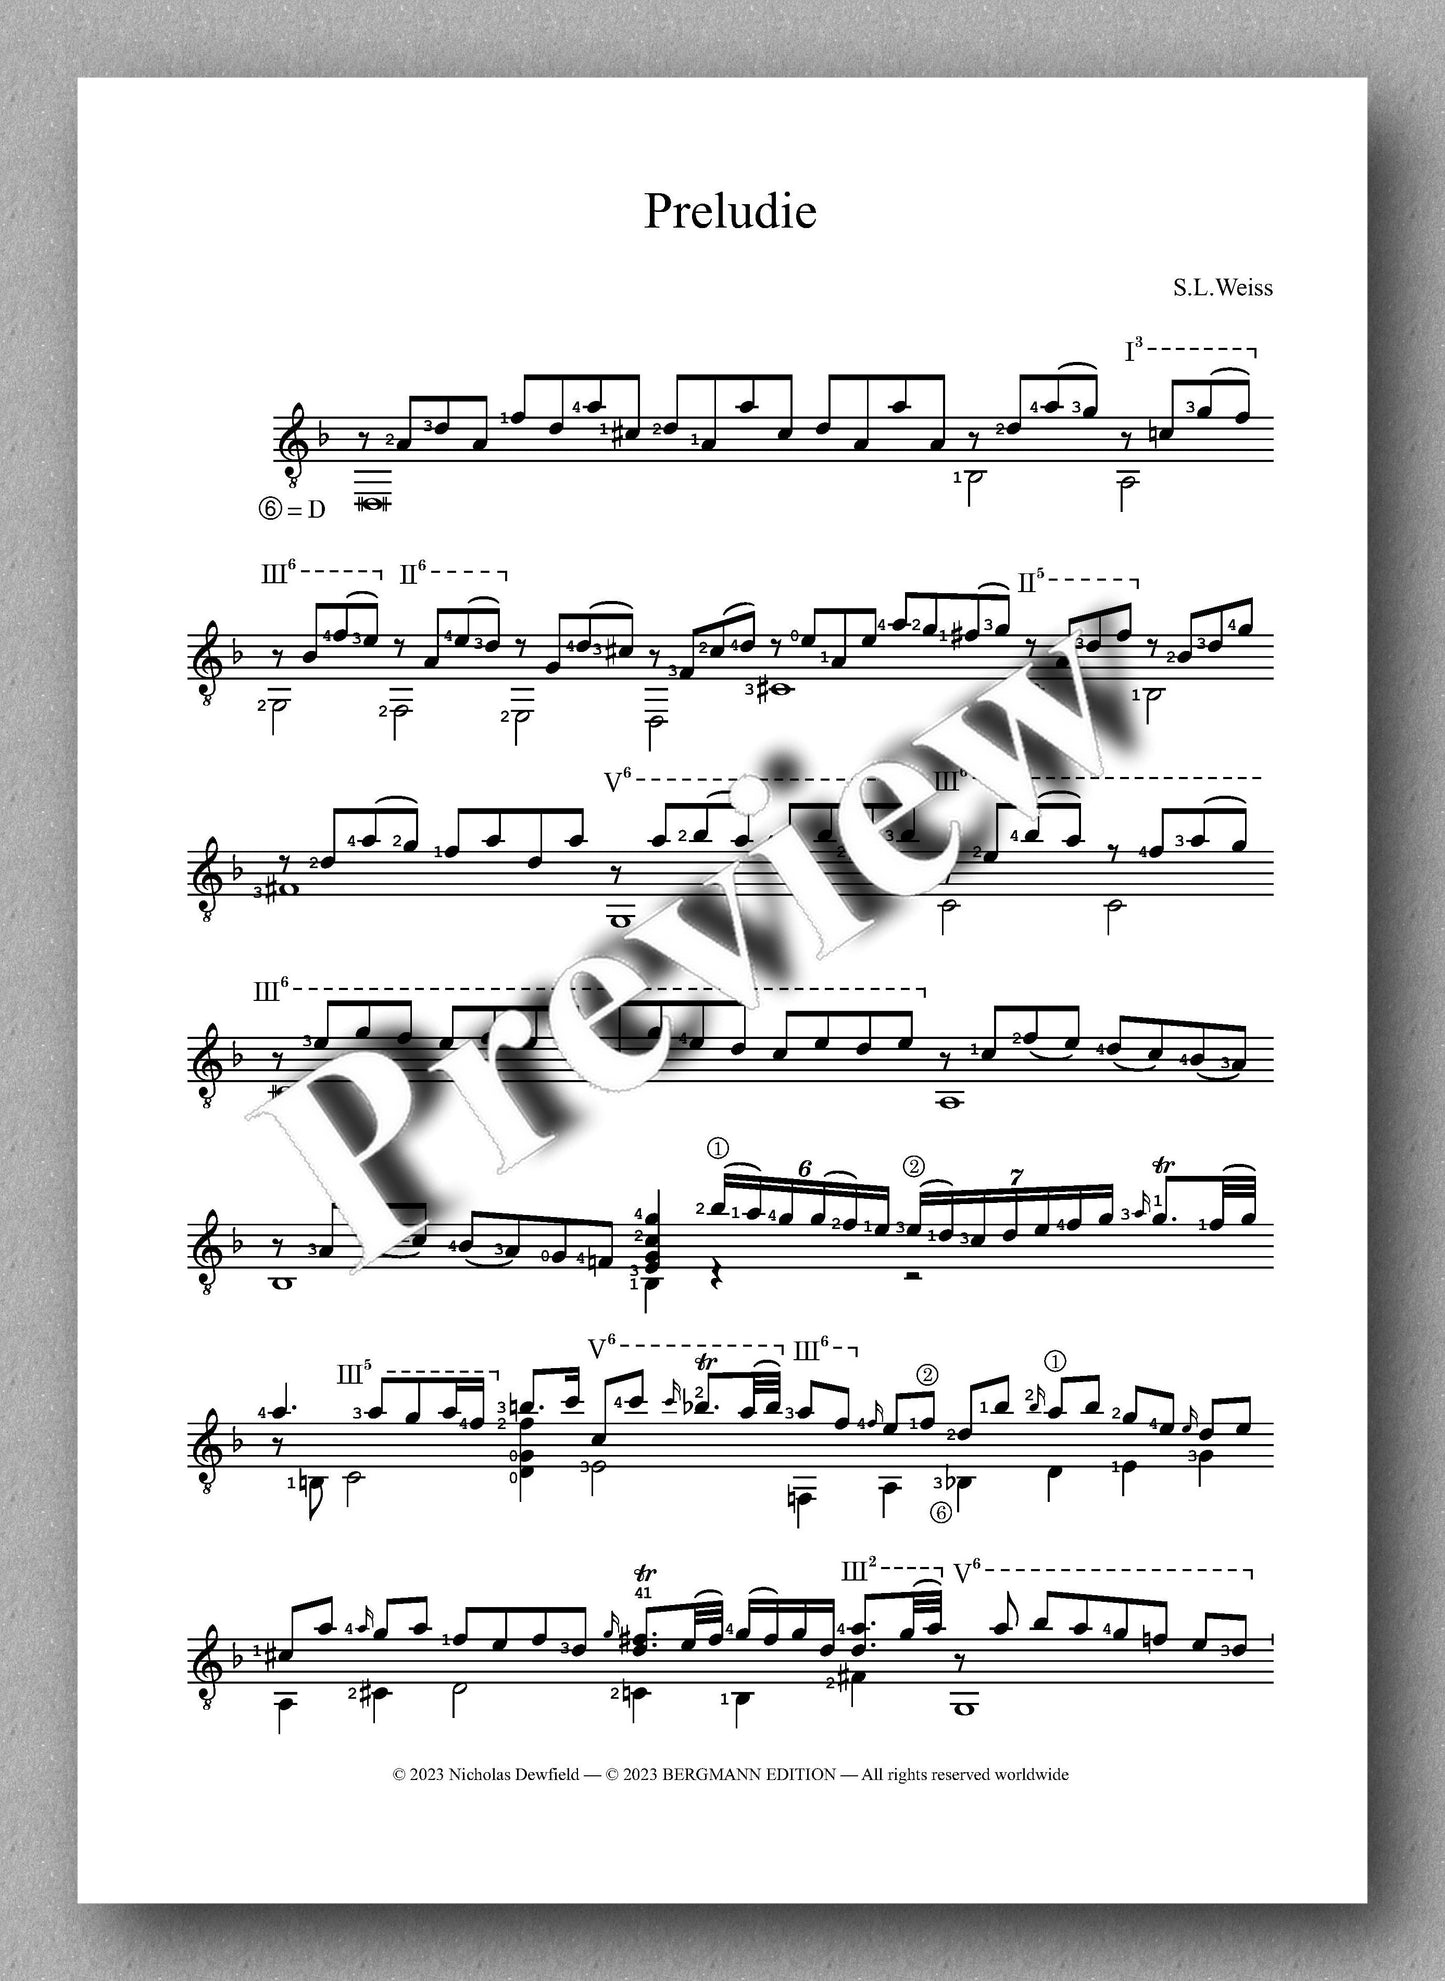 Sylvius Leopold Weiss (1687-1750), Sonata No. 13 - preview of the music score 1